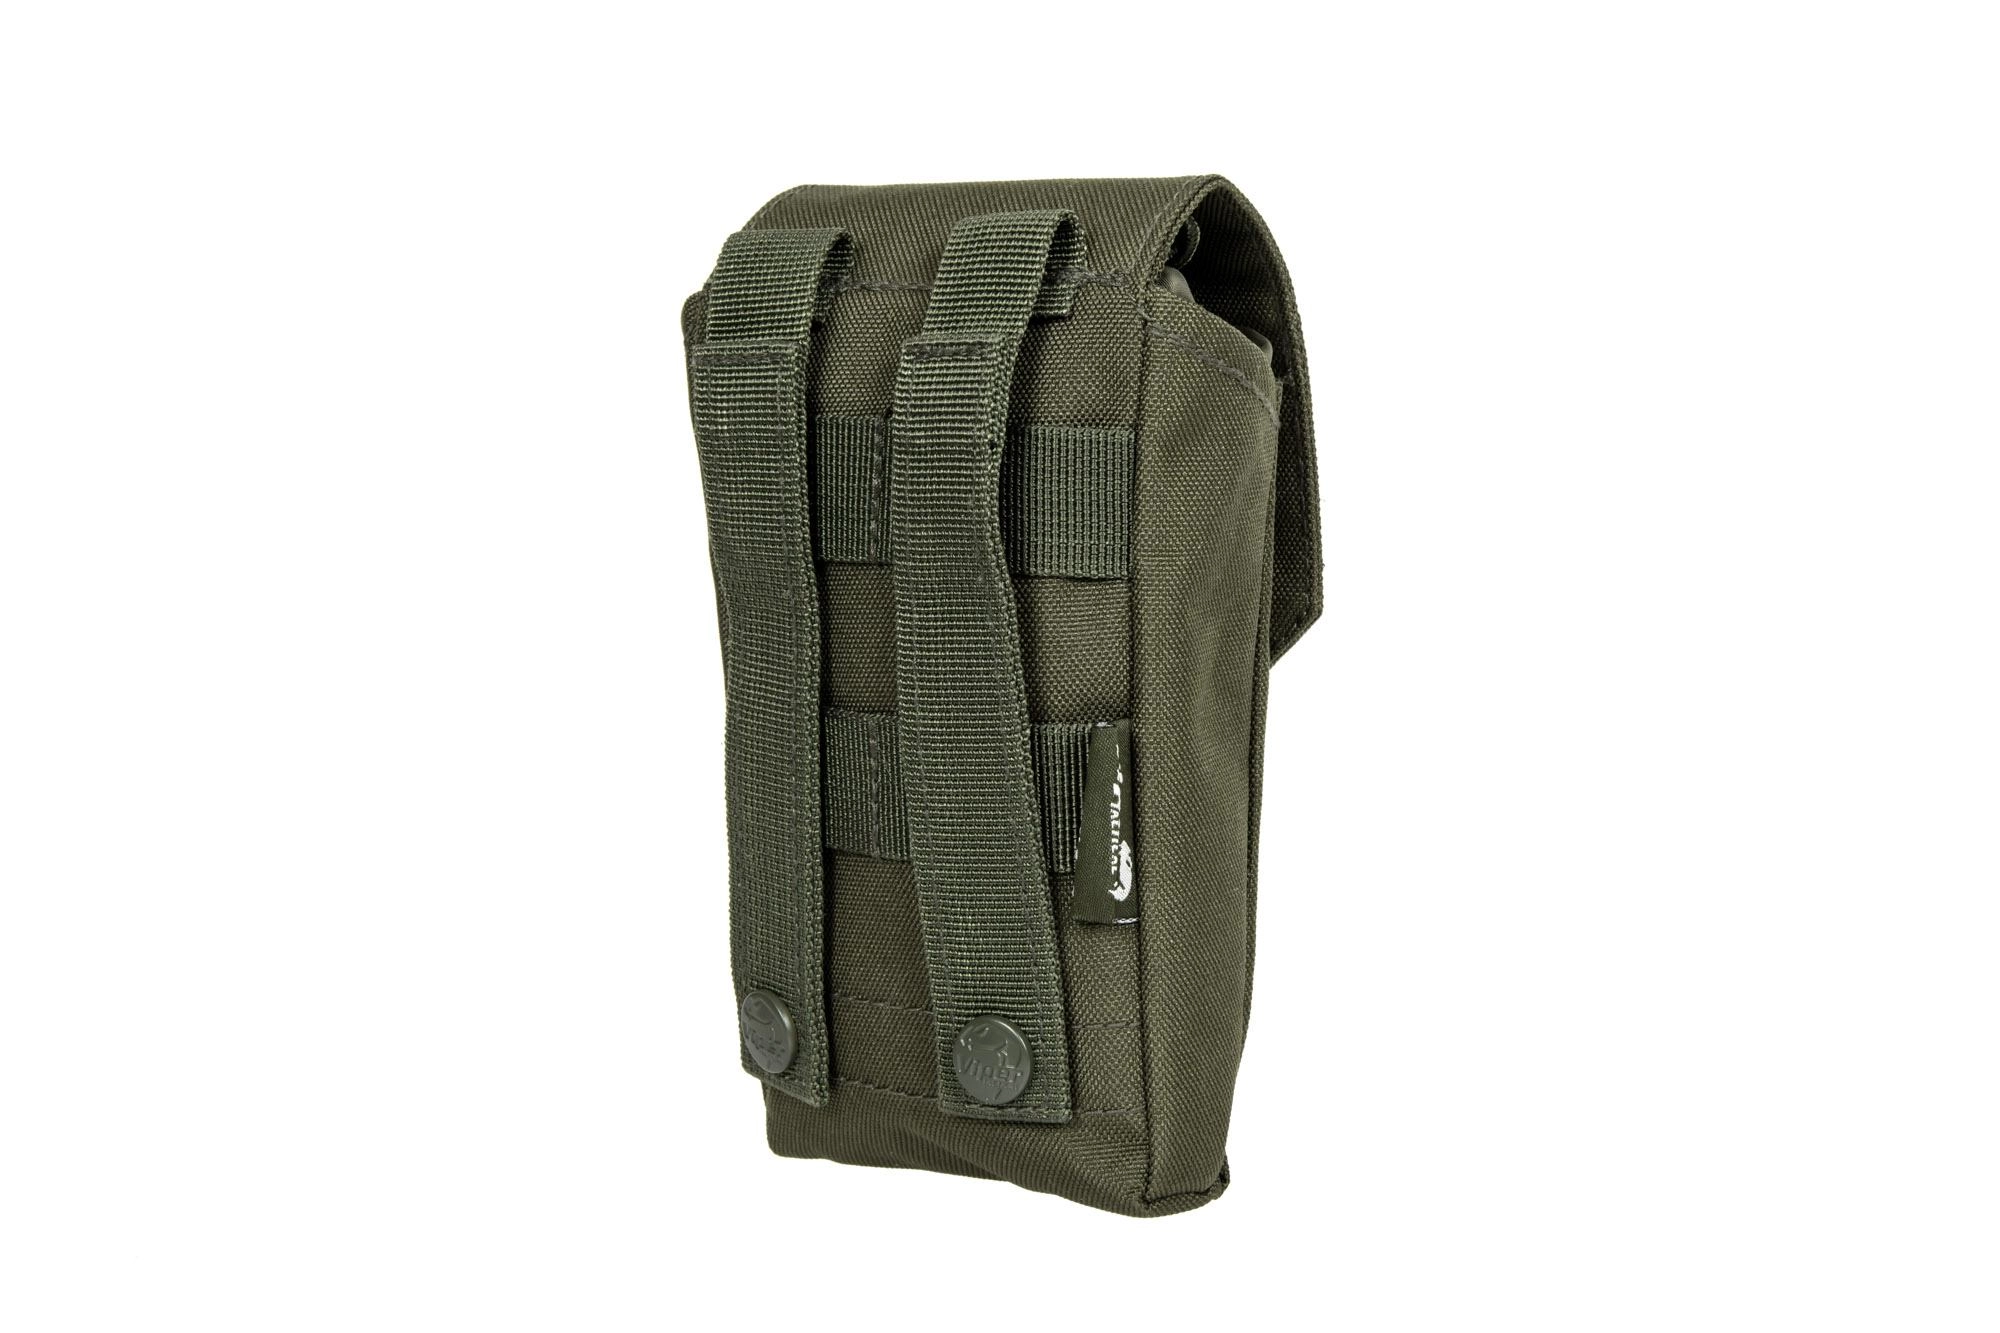 First Aid kit Pouch - olive